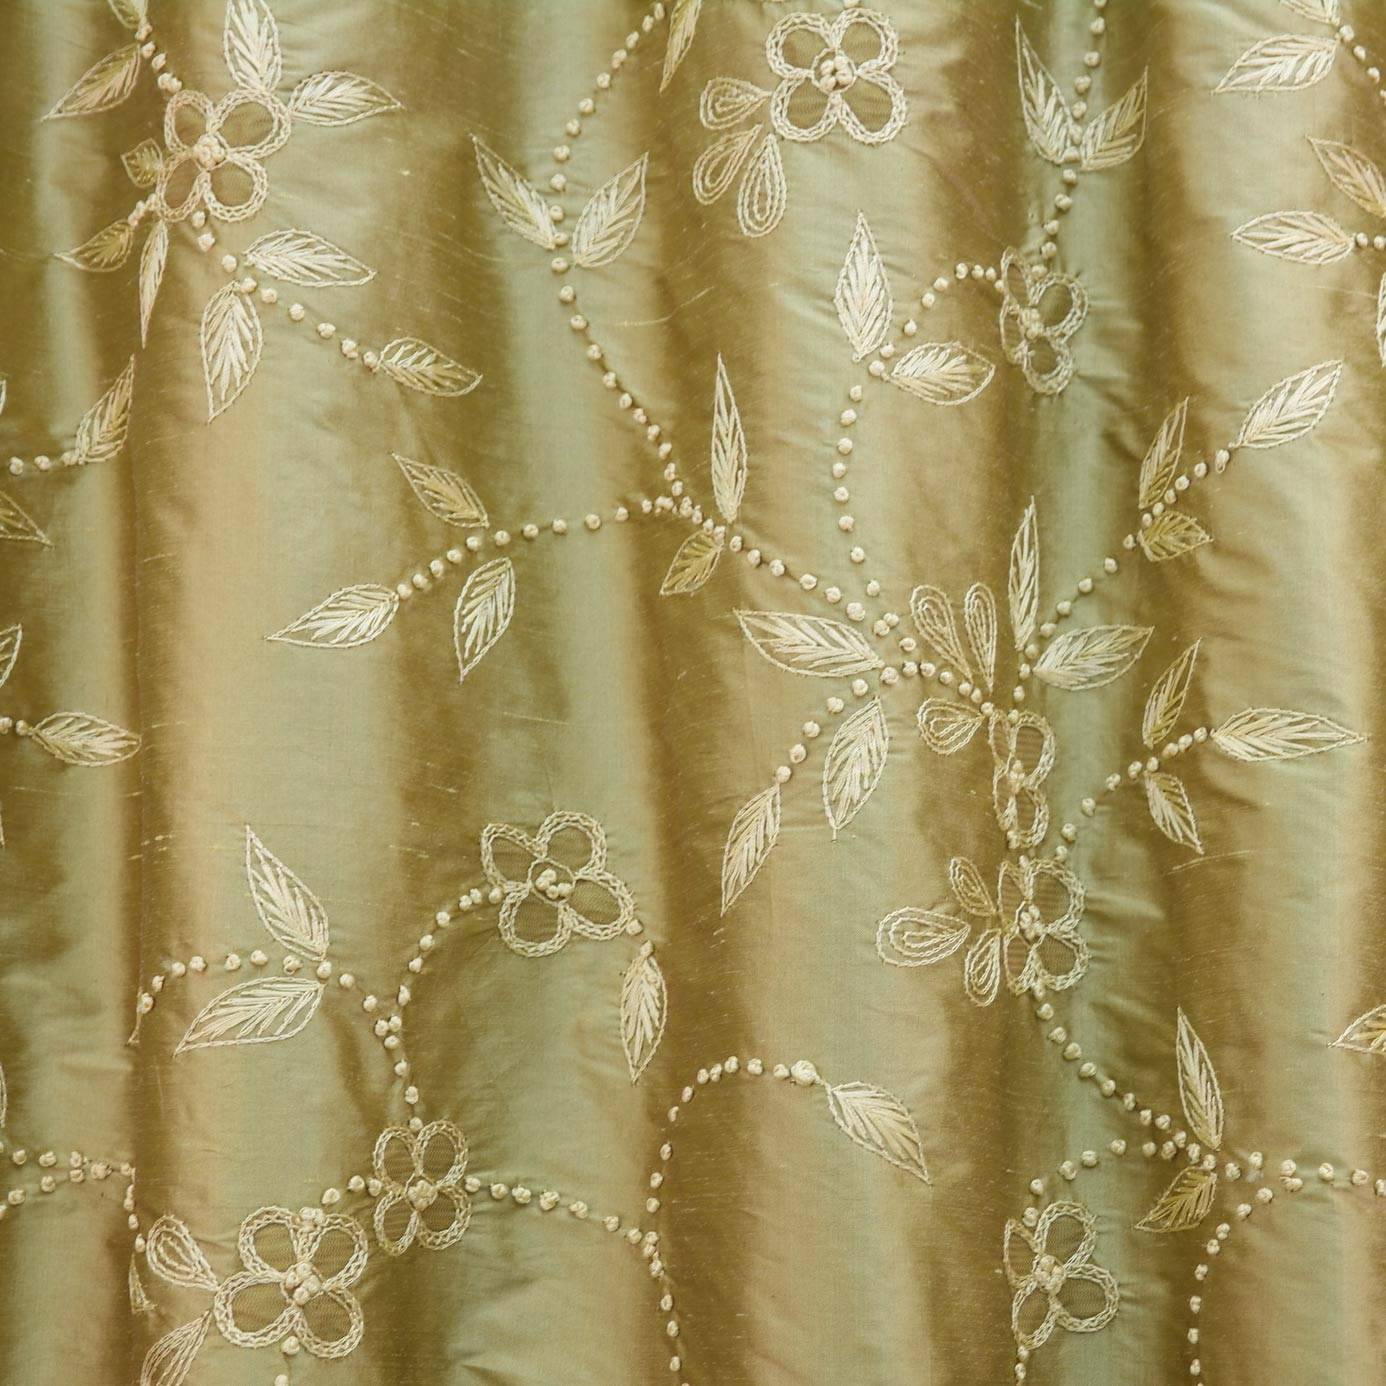 French Knot Fabric - Muscatelle (FRE003) - OUTLET SALES All Fabric ...